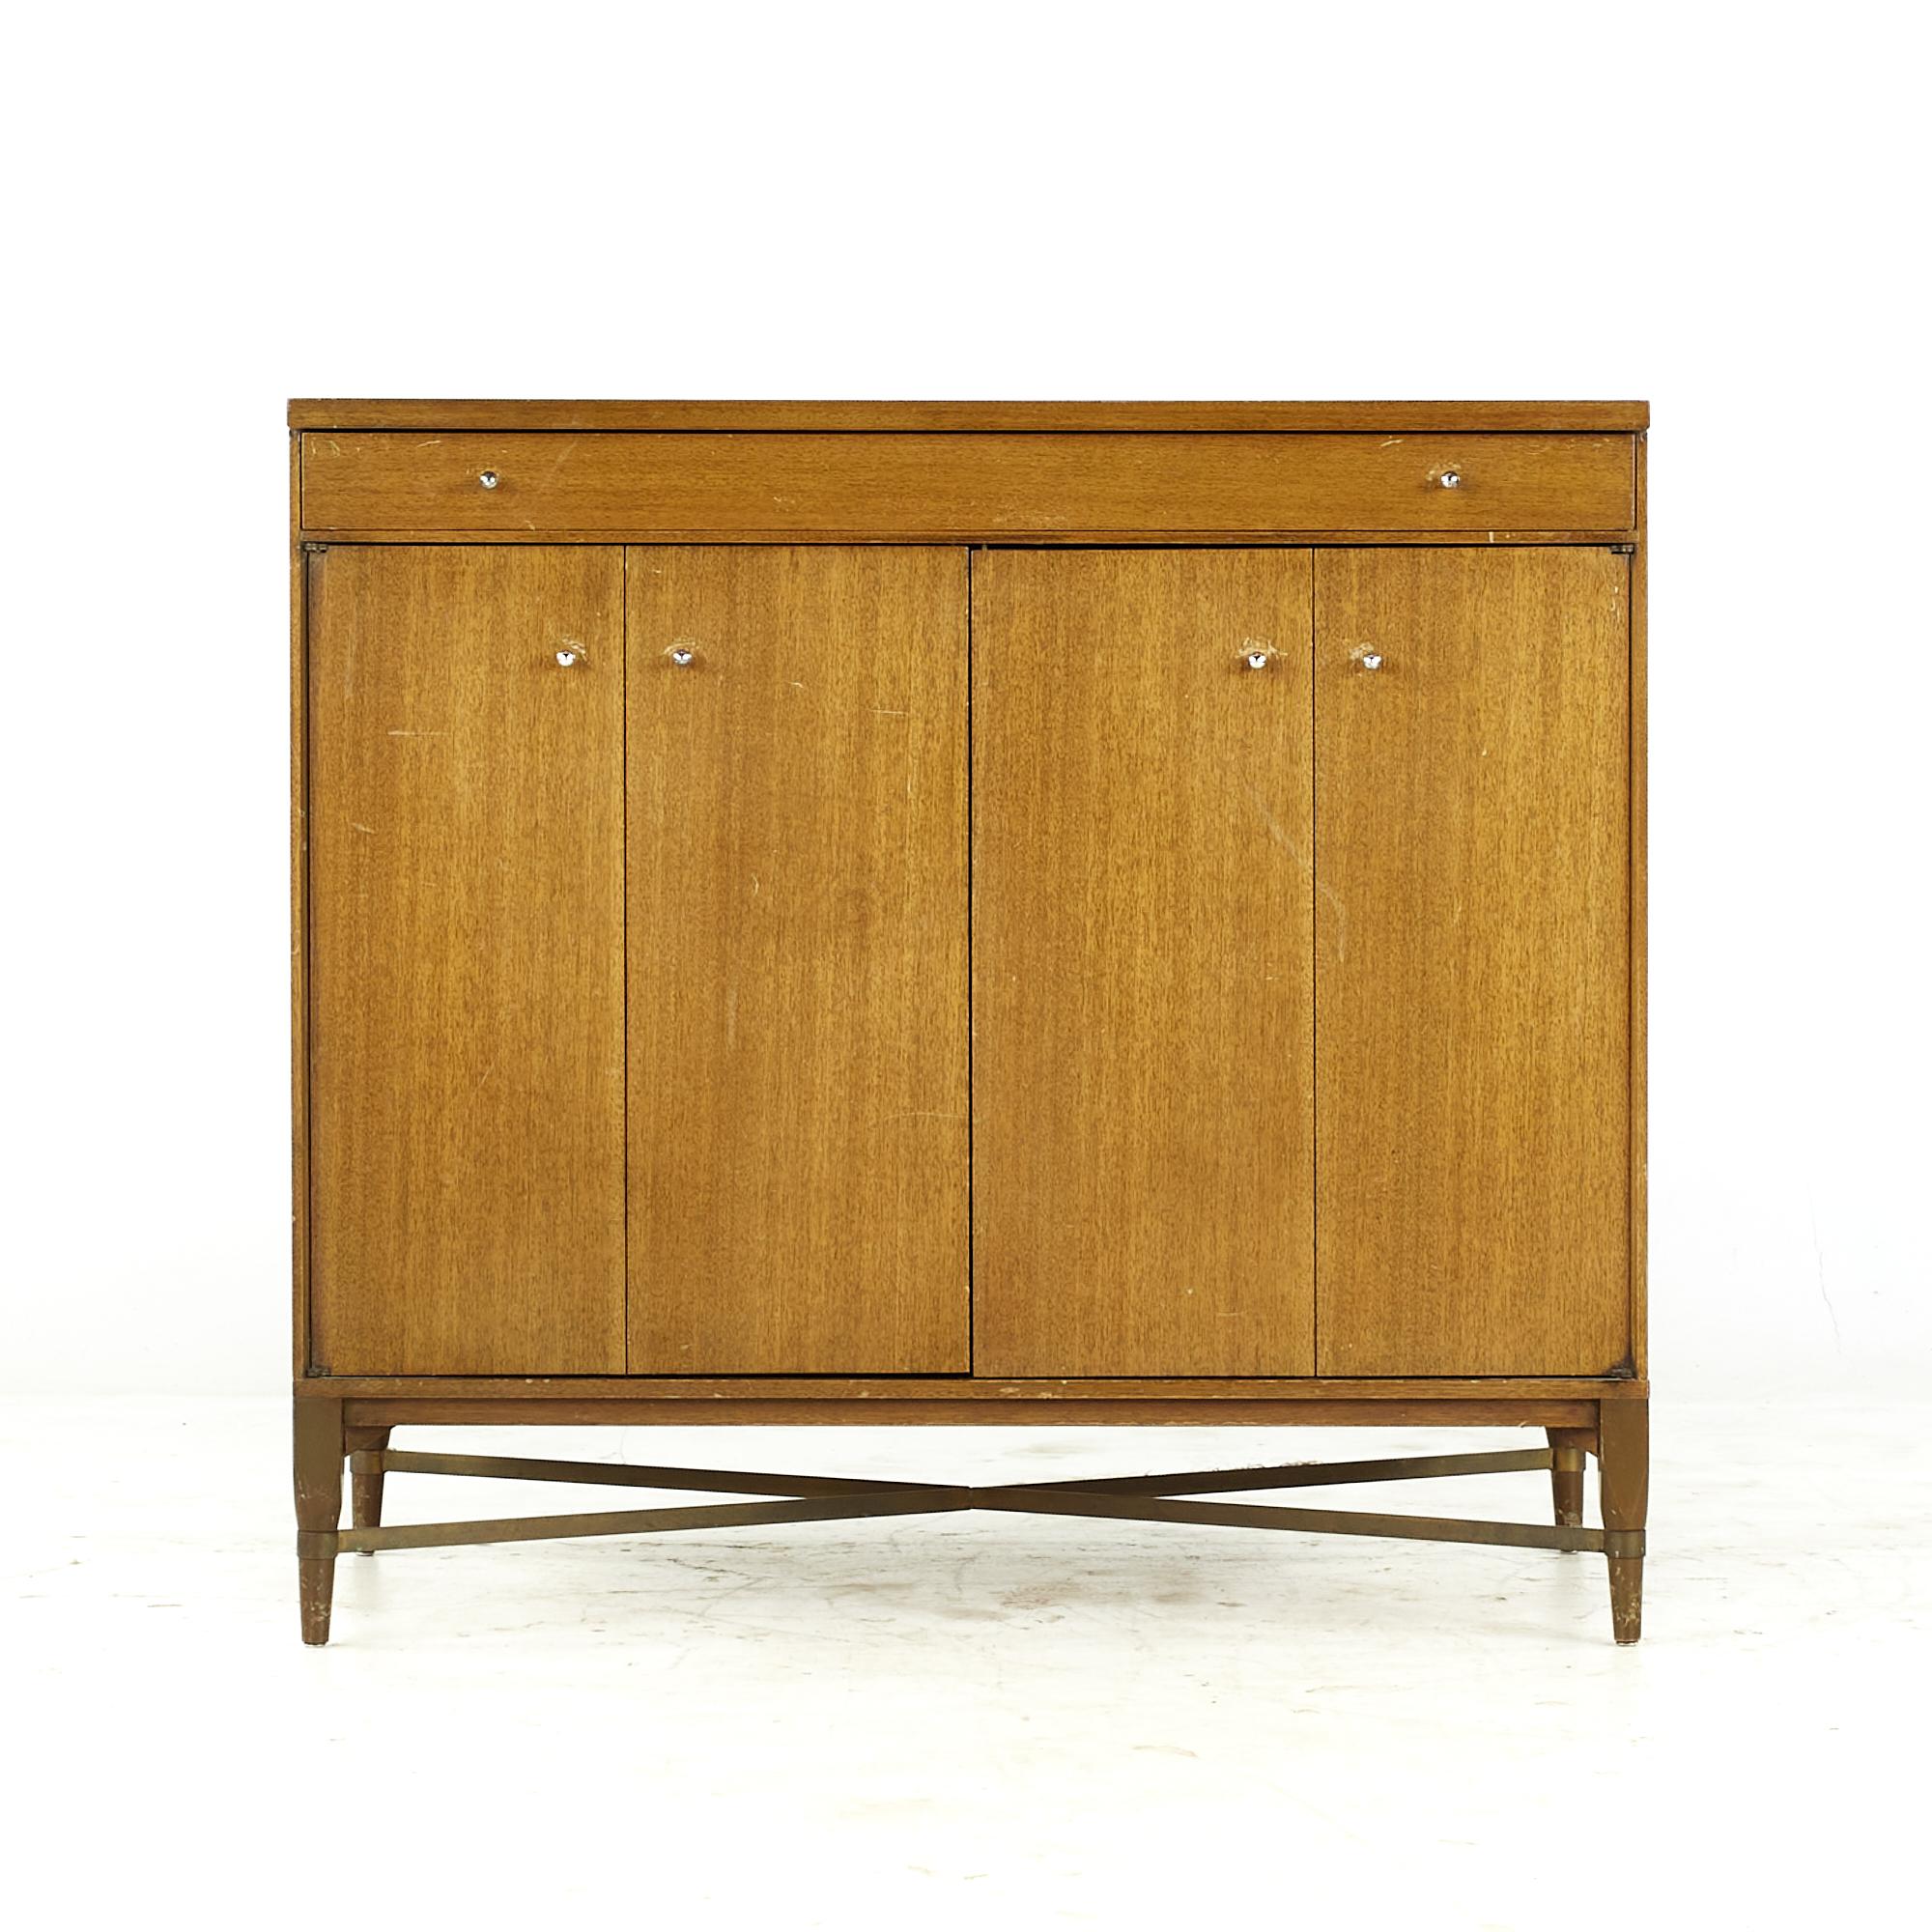 Paul McCobb for Calvin midcentury Mahogany and Brass Bar Credenza Cabinet

This credenza measures: 36 wide x 19.25 deep x 33.25 inches high

All pieces of furniture can be had in what we call restored vintage condition. That means the piece is